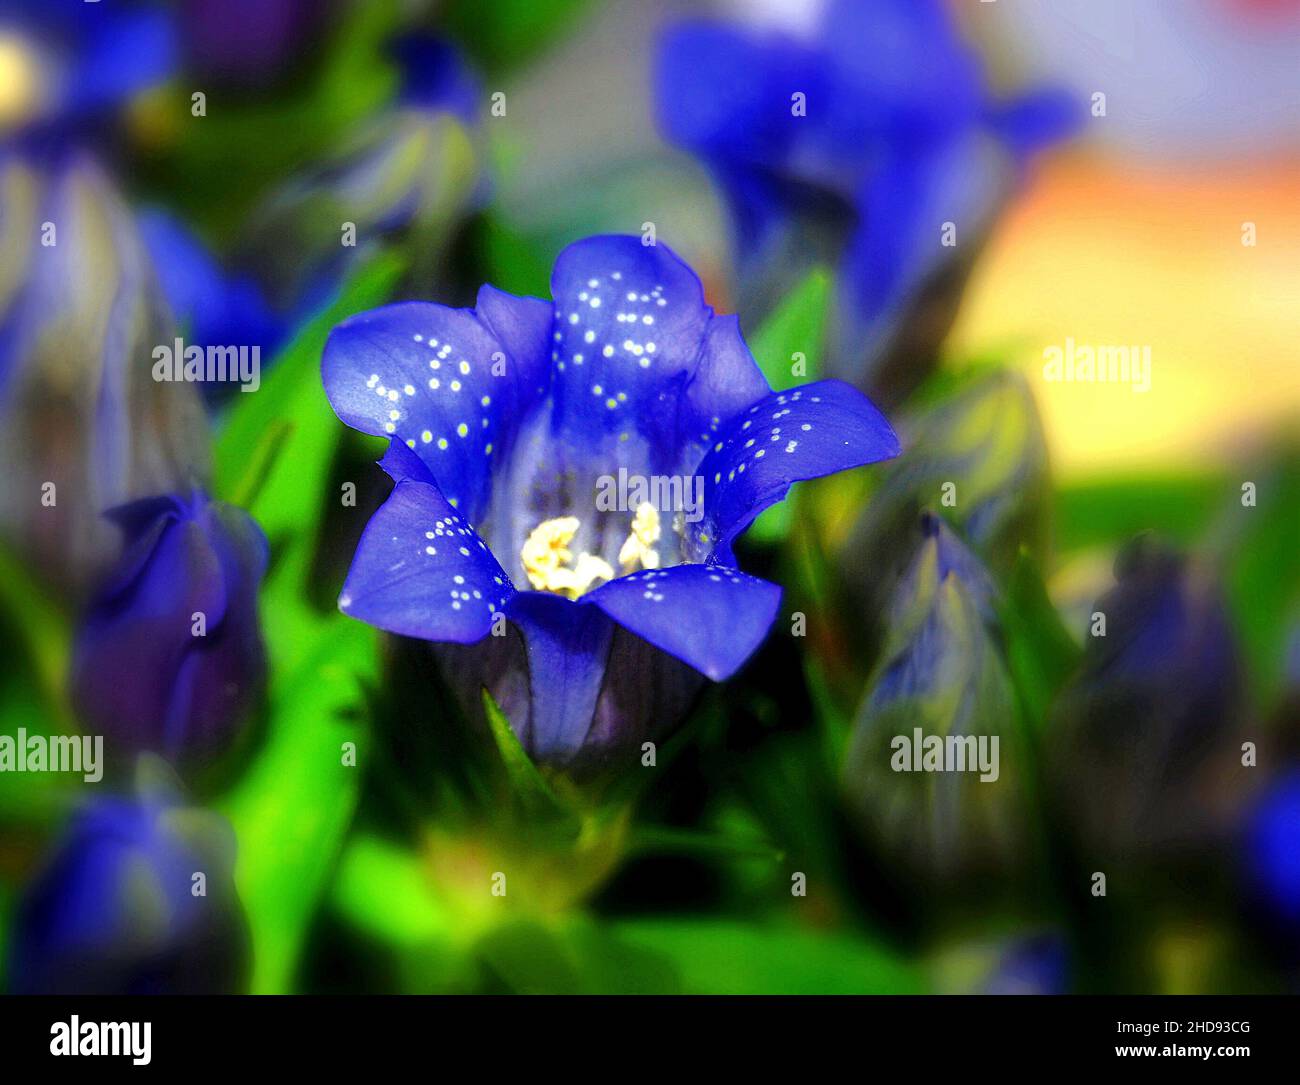 Closeup of the Gentiana scabra, the Japanese gentian. Stock Photo